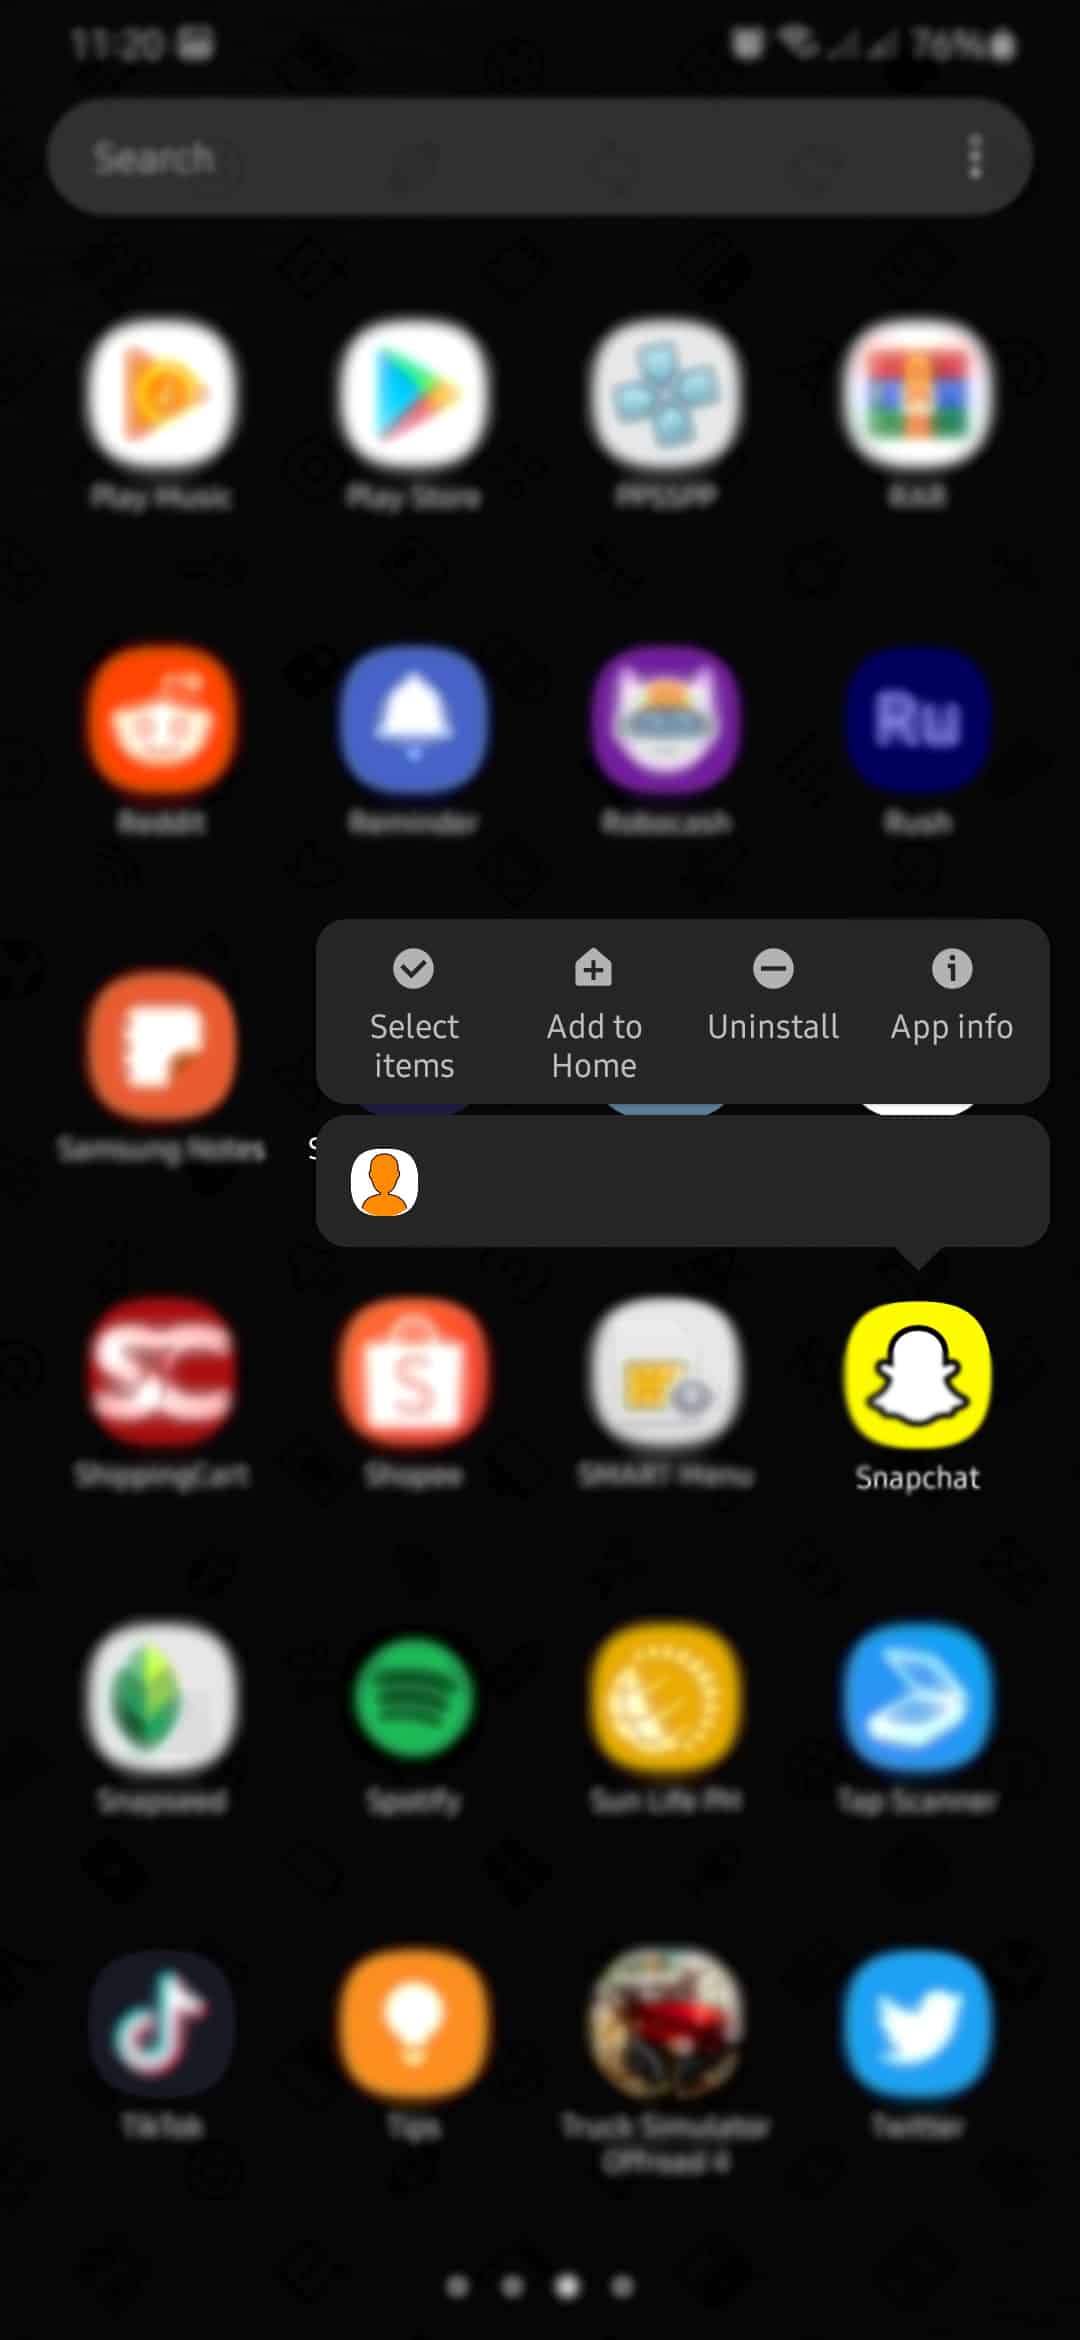 Snapchat notifications not working